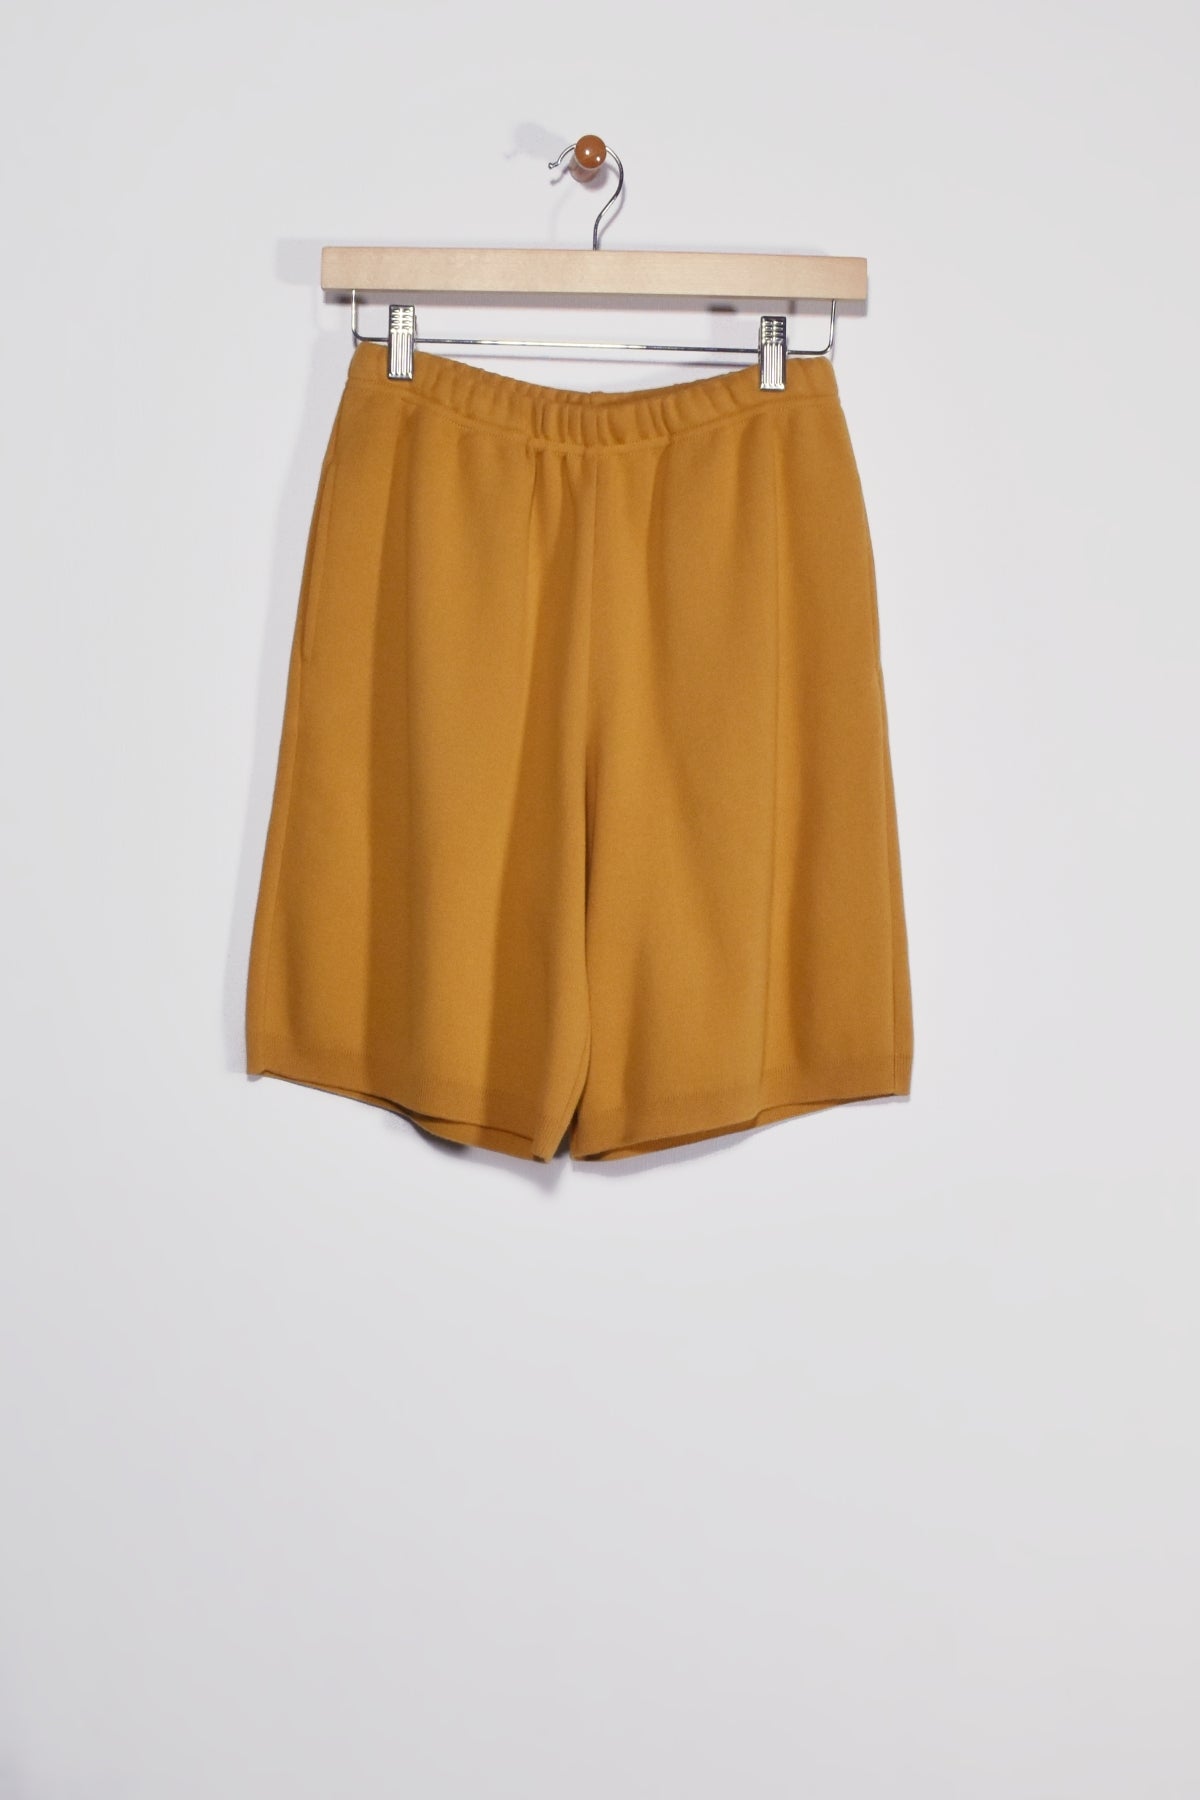 20" Classic Shorts with Pockets New Orleans Knitwear